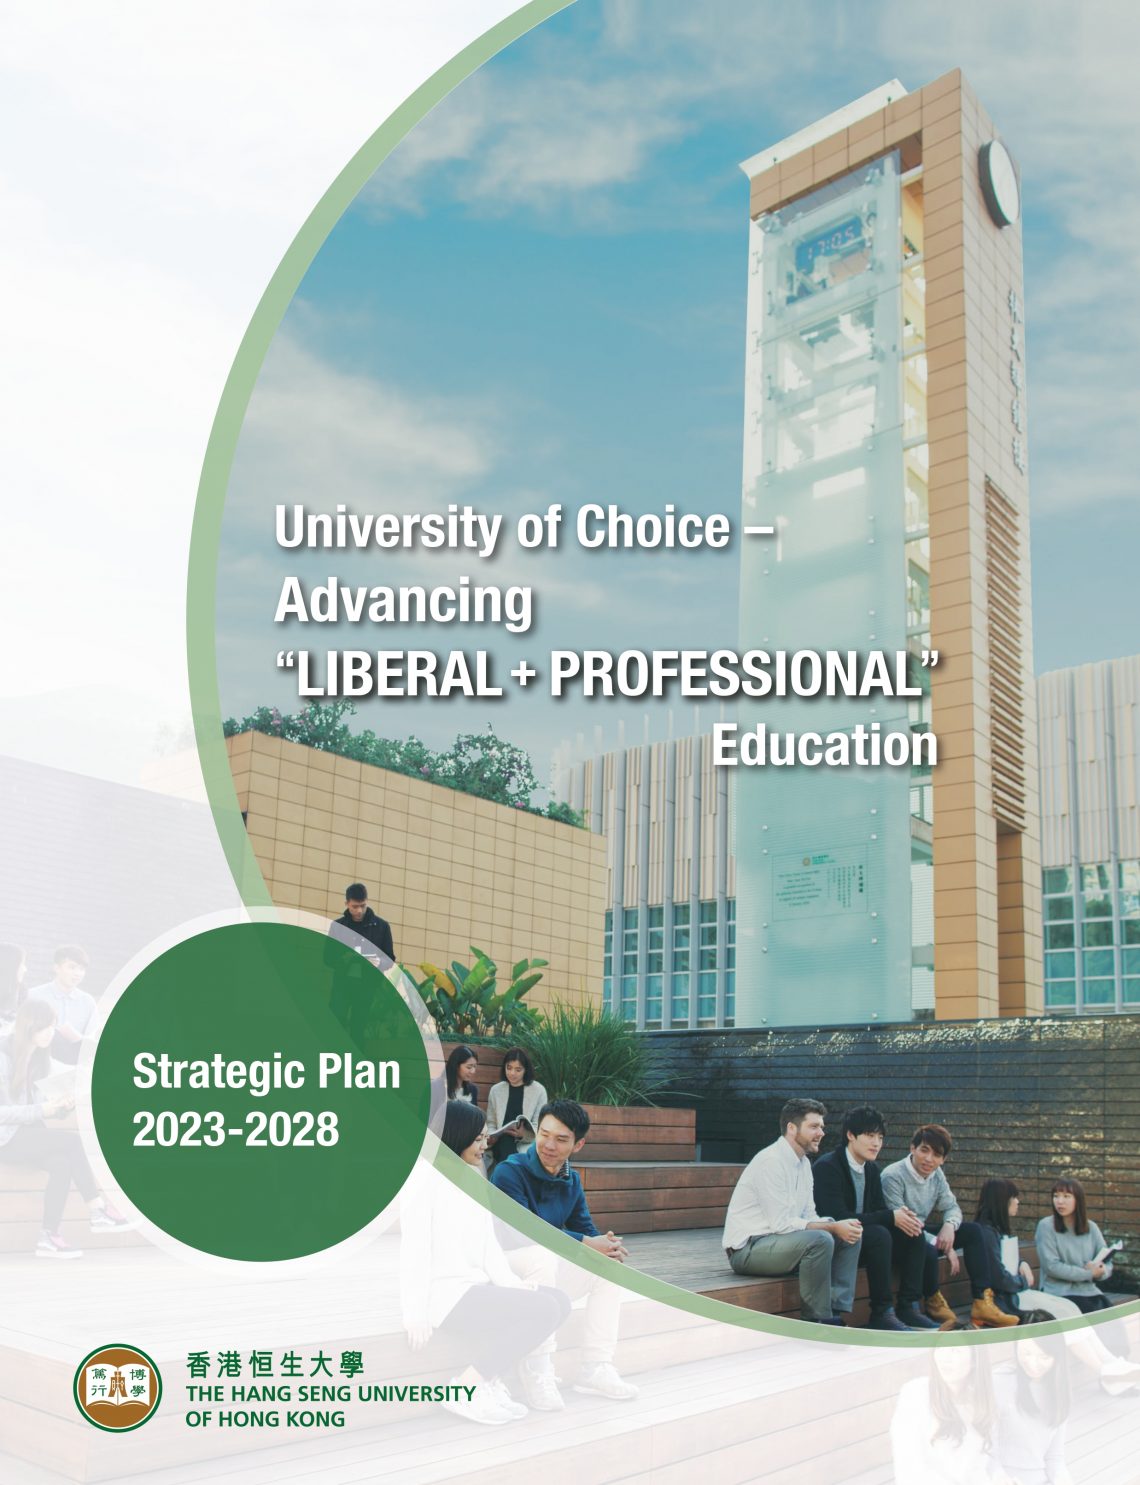 HSUHK announced its new Strategic Plan 2023-2028, guiding the University’s directions and priorities for the next five years.